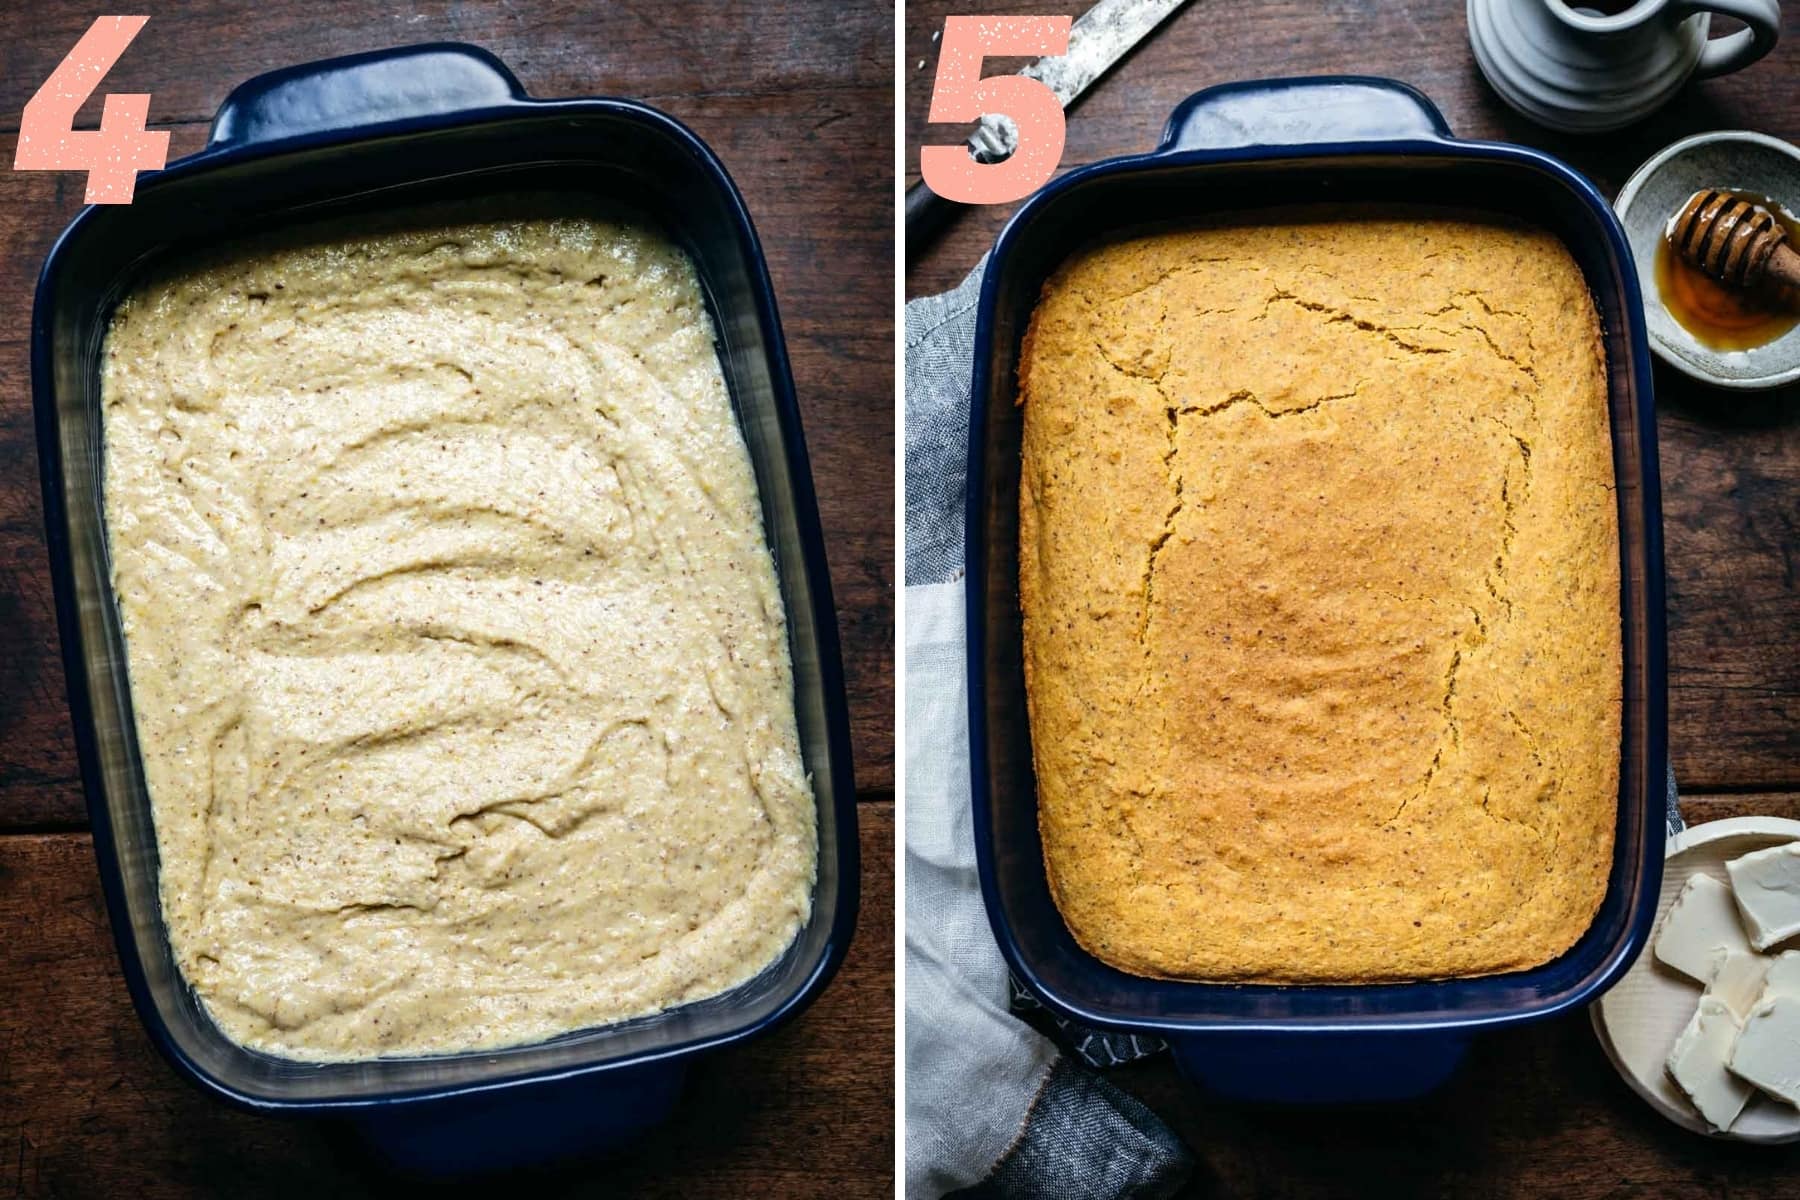 gluten free vegan cornbread in baking dish before and after baking.